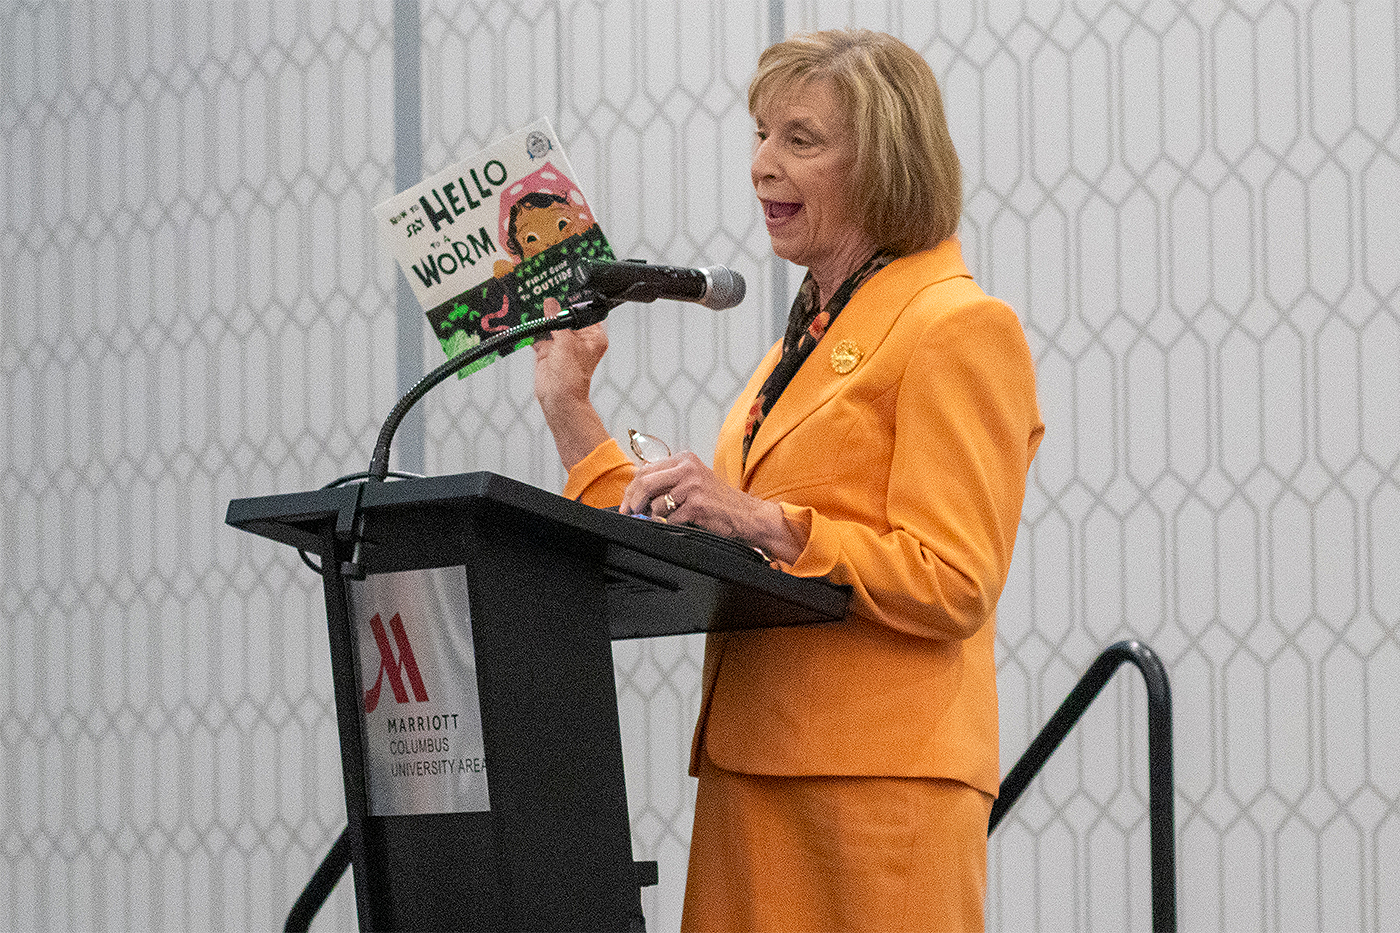 Ohio First Lady Fran DeWine holds the children's book "How to Say Hello to a Worm" in her right hand as she speaks into a microphone behind a podium at the 2023 Crane Symposium on Children.